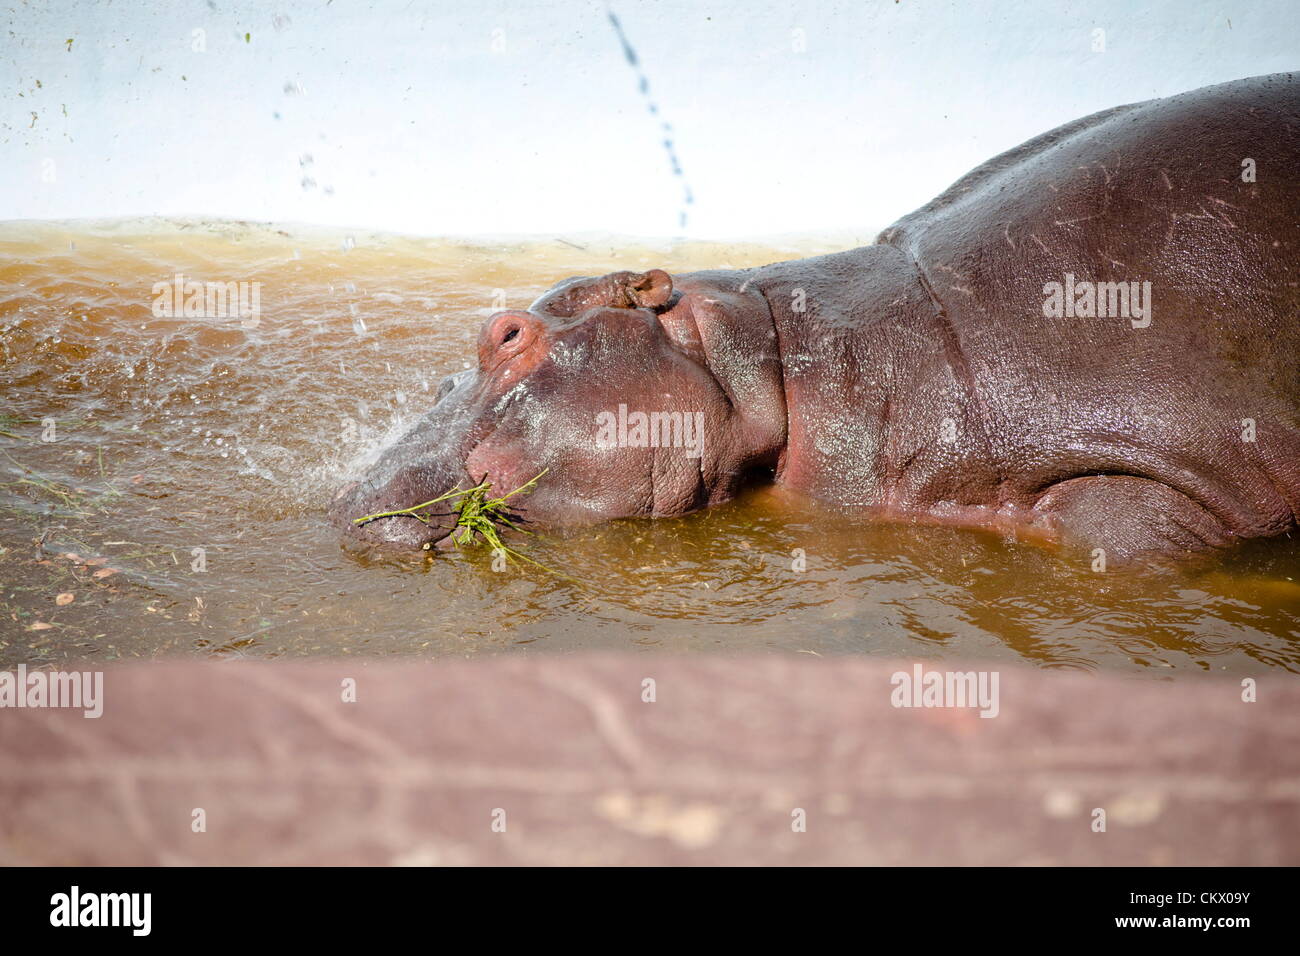 24th Aug 2012. MODIMOLLE, SOUTH AFRICA: A young hippo bull named Solly who was trapped in a swimming pool on a game farm near Modimolle for three days, has died during a rescue attempt in Limpopo, South Africa. The bull was apparently kicked out of its family group by more dominant males. (Photo by Gallo Images / Franco Megannon/Alamy Live News) Stock Photo